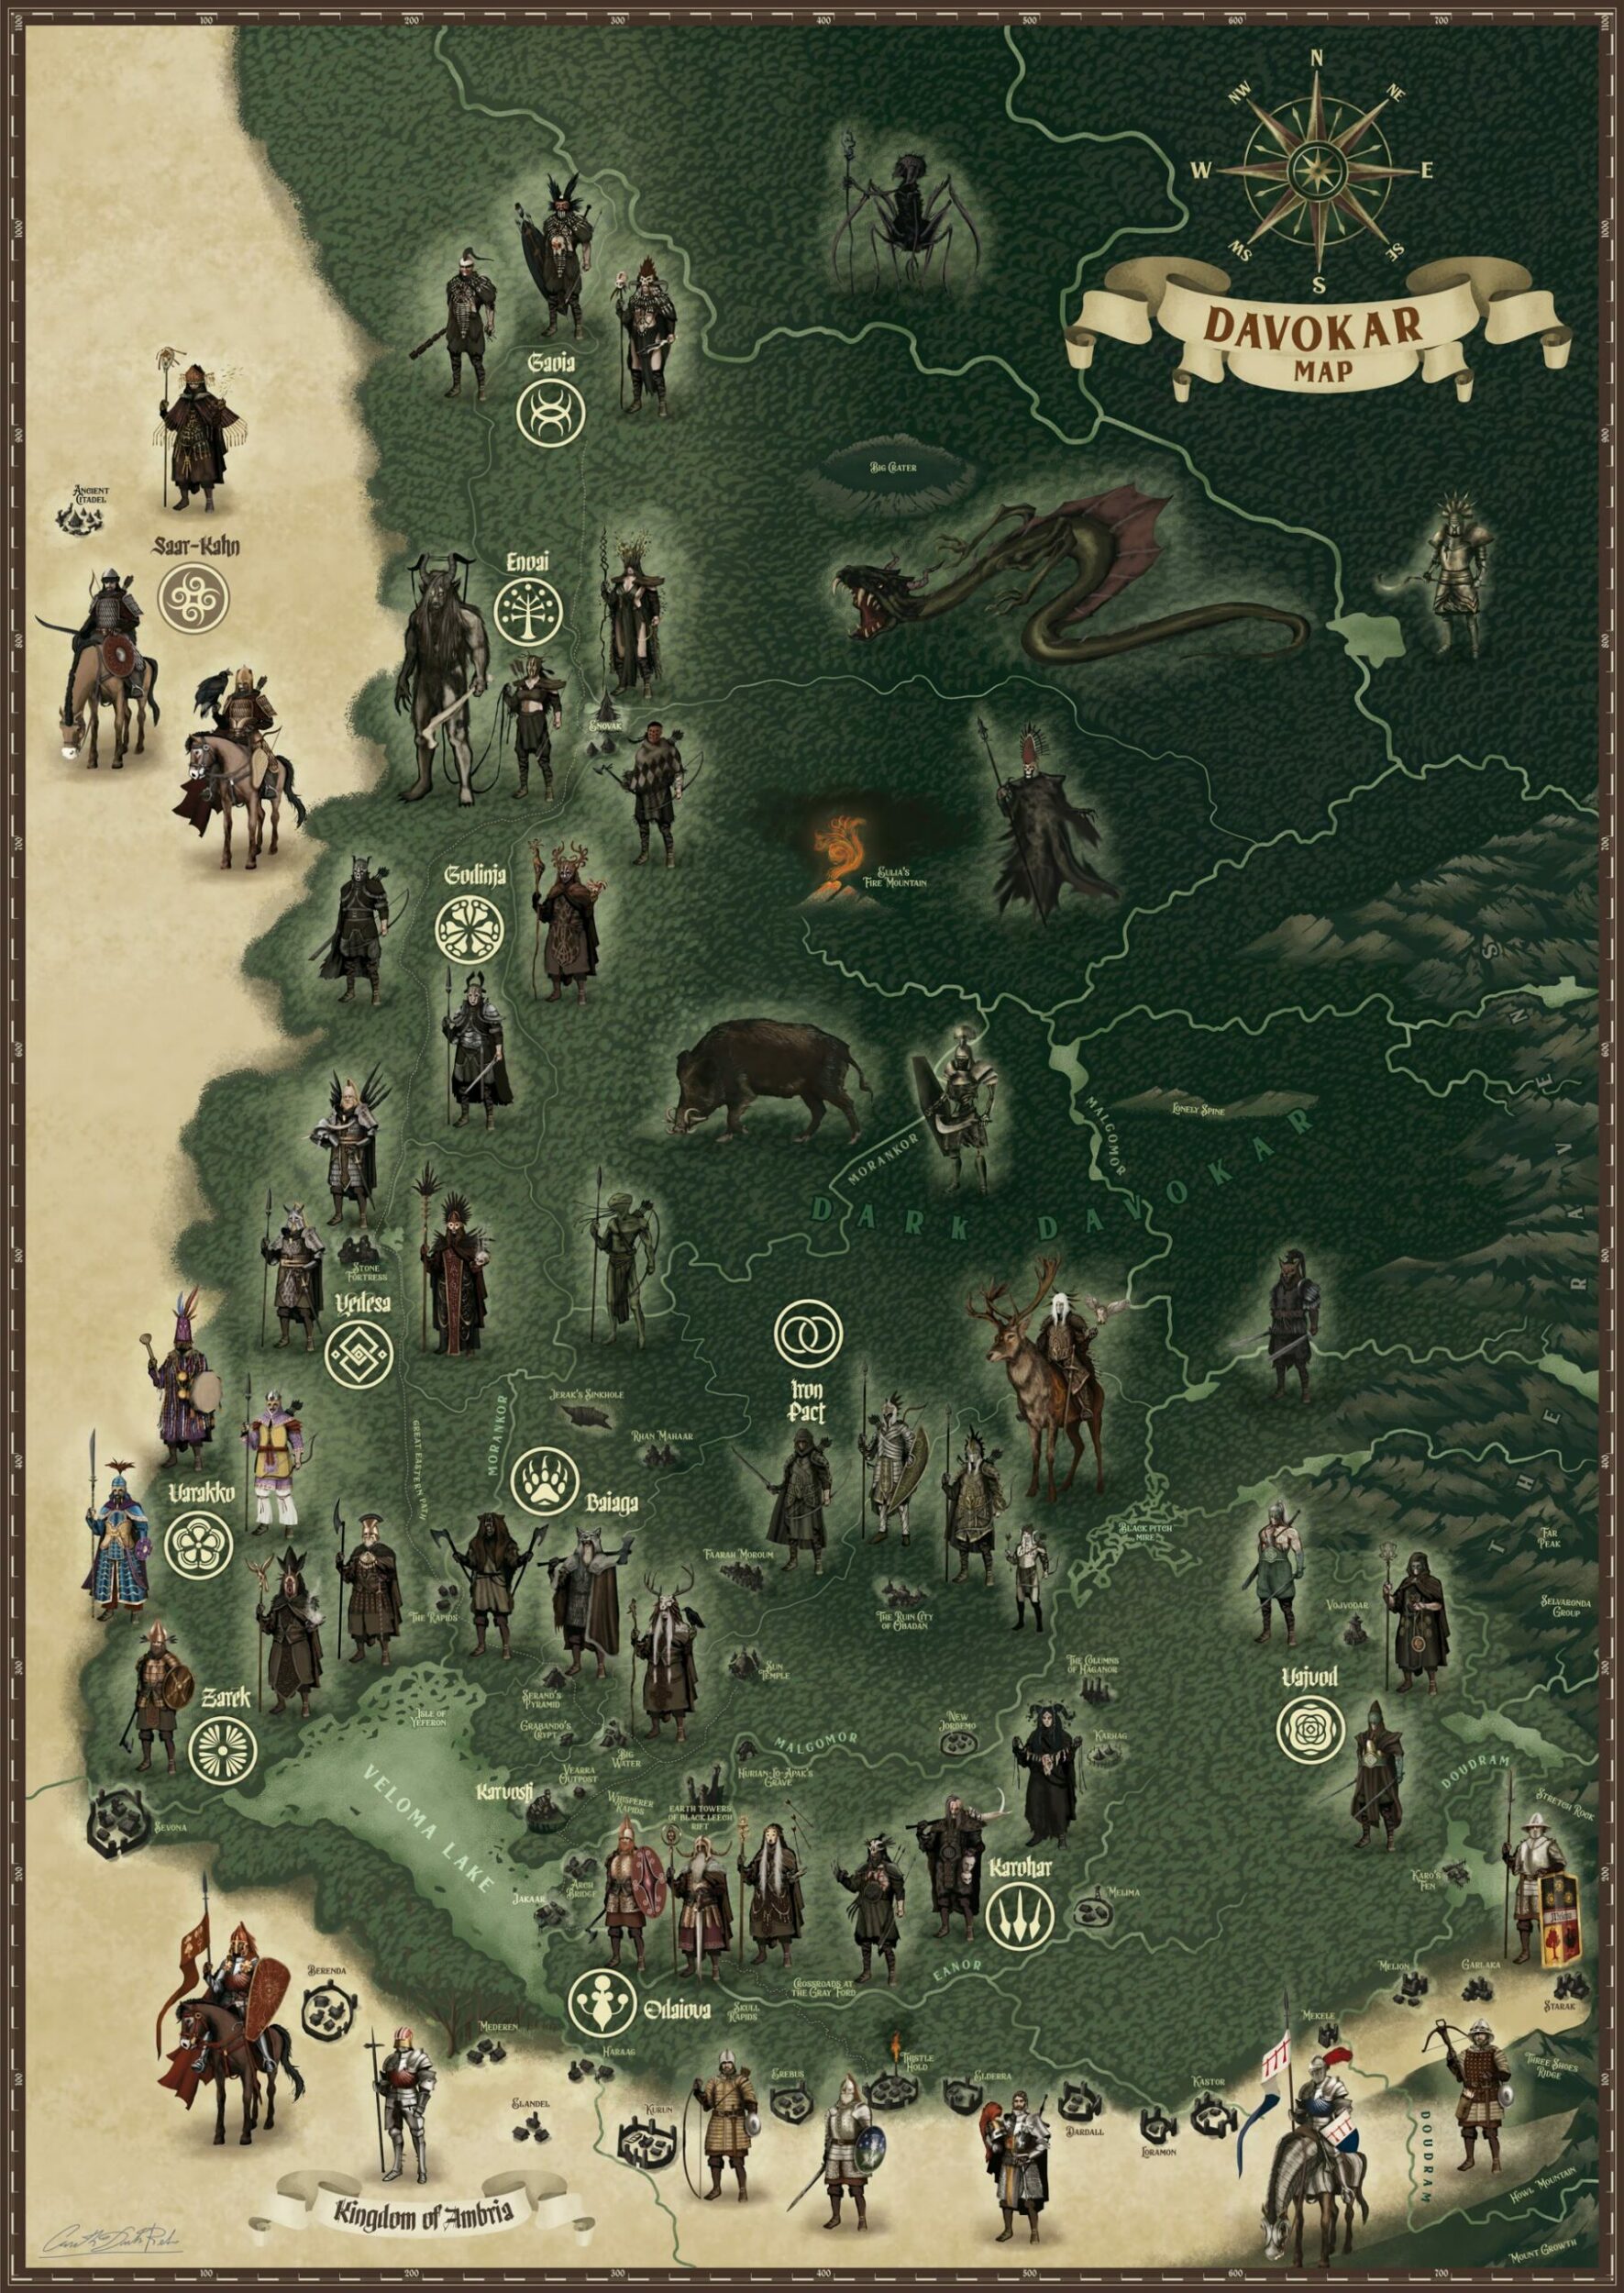 Davokar map Symbaroum - Map of Davokar Forest of Symbaroum with Illustrated Characters and Barbarian Clans Symbols, English Version - Symbaroum Maps